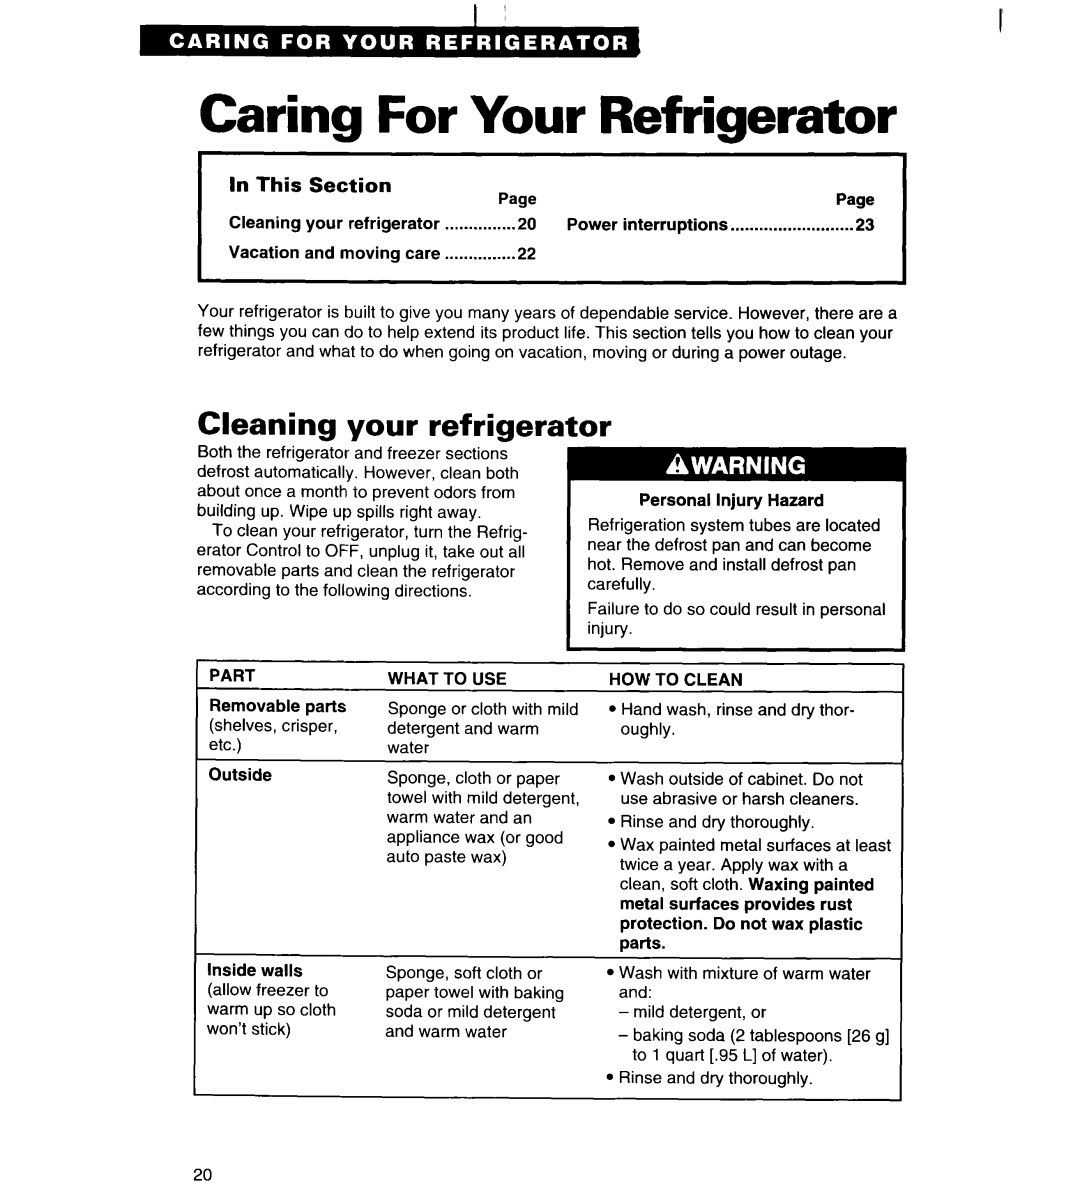 Whirlpool TS22AW important safety instructions Caring For Your Refrigerator, Cleaning your refrigerator, In This Section 